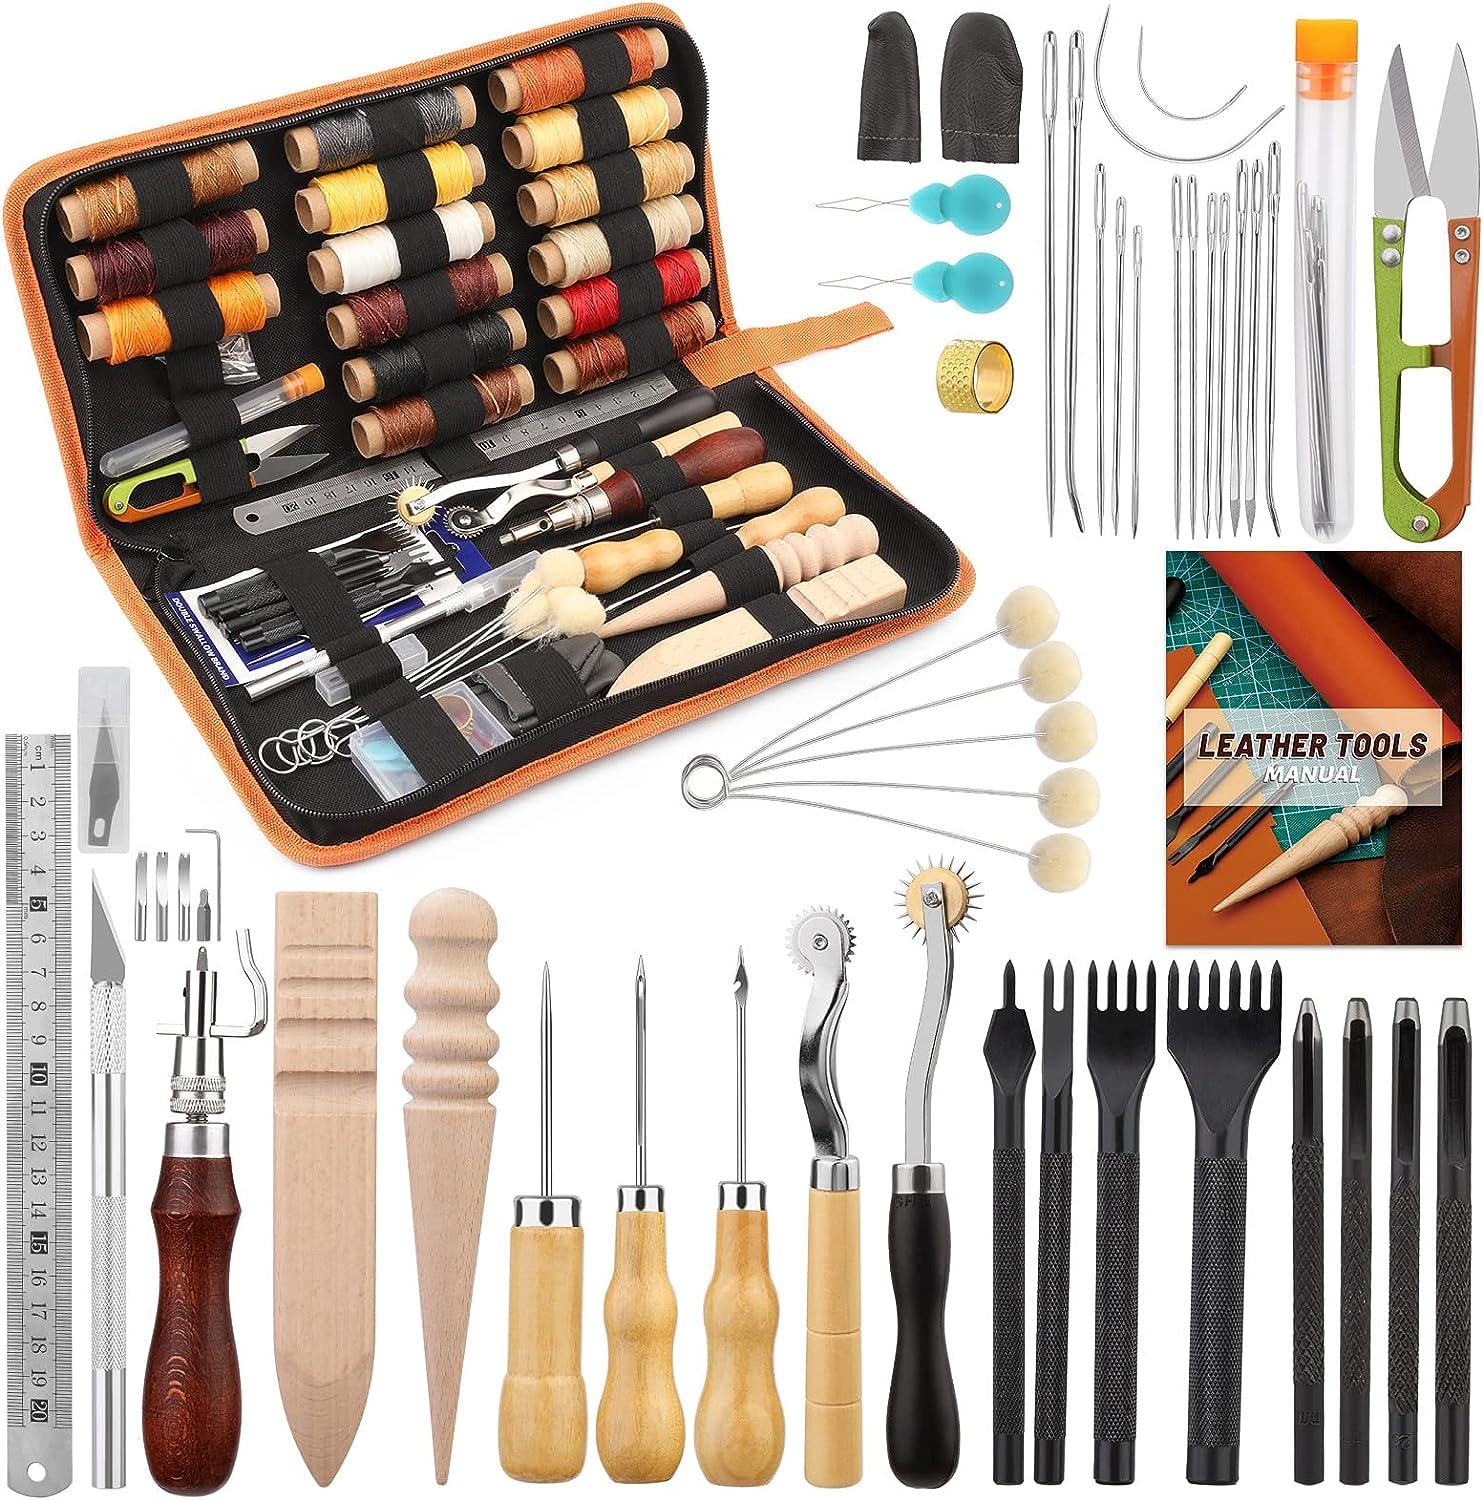 GCP Products Leather Working Tools Leather Sewing Kit Leather Craft Tools  With Storage Bag, Groover, Stitch